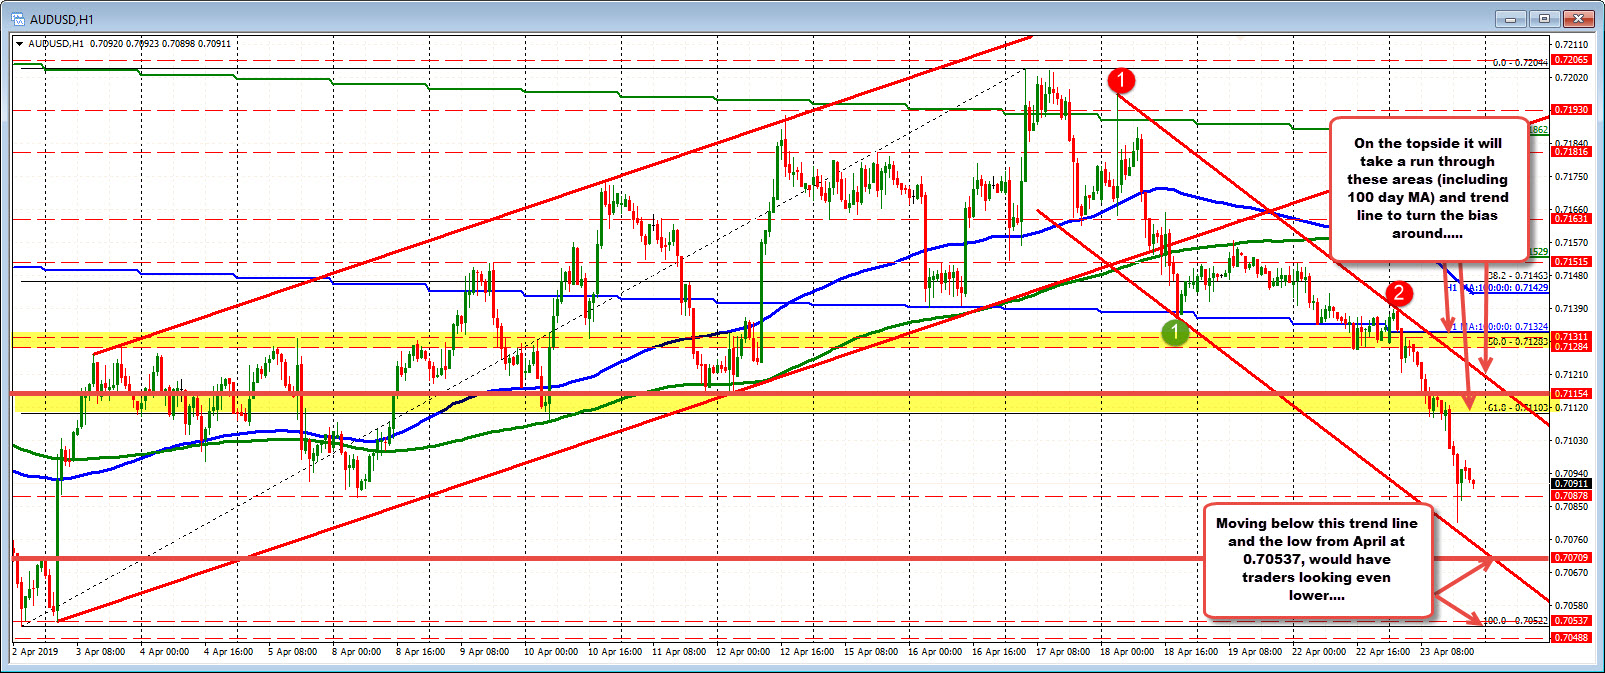 AUDUSD falls from 100 day MA and 50% retracement